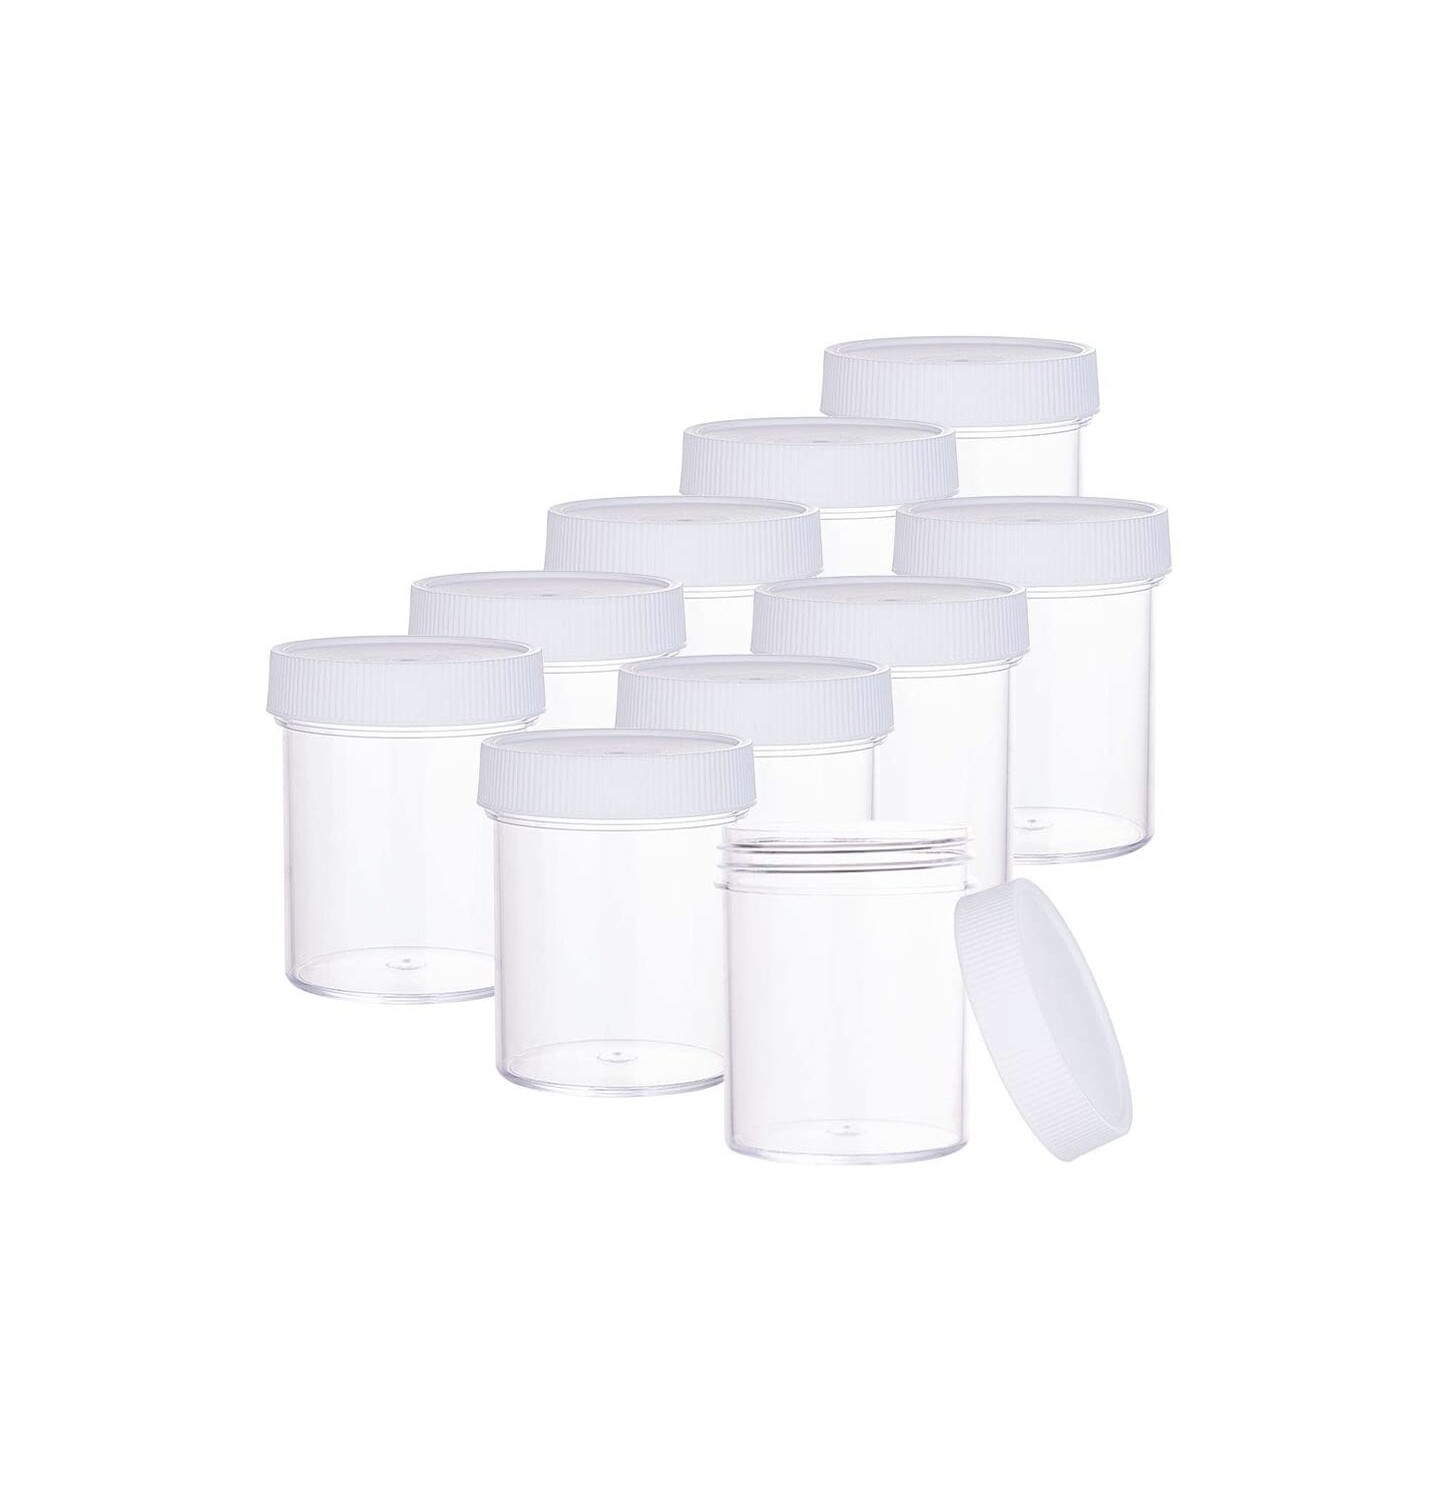 
Clear Round Wide-Mouth Plastic Jars - 4 oz, White Cap (EACH)